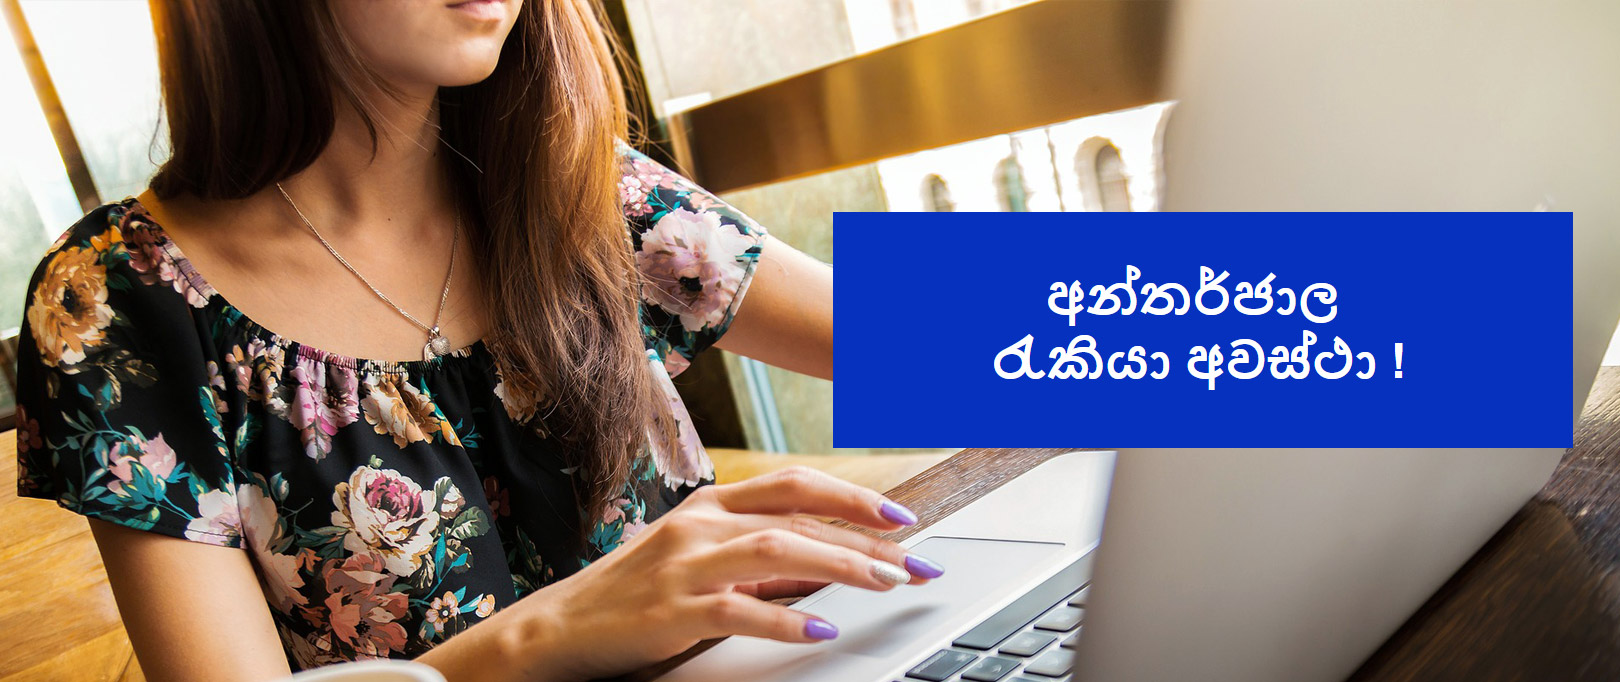 Online Jobs From Home In Sri Lanka The Easiest Way To Get Your New Job